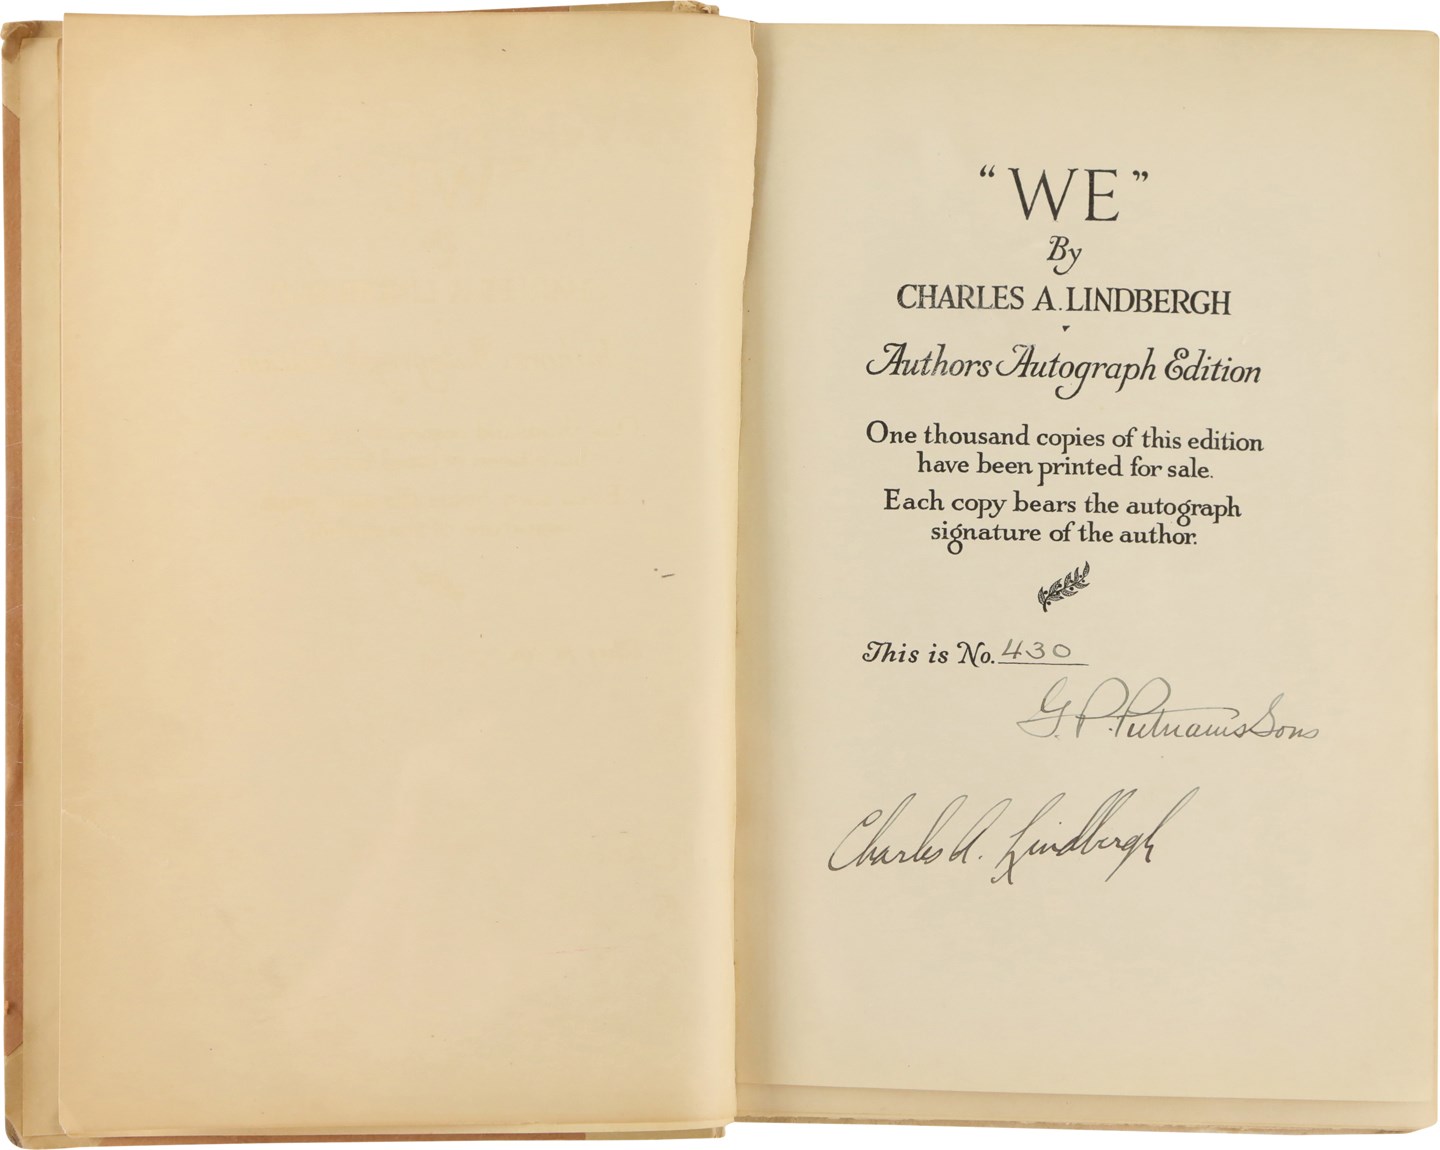 - 1927  "WE" First Edition Signed by Charles A. Lindbergh